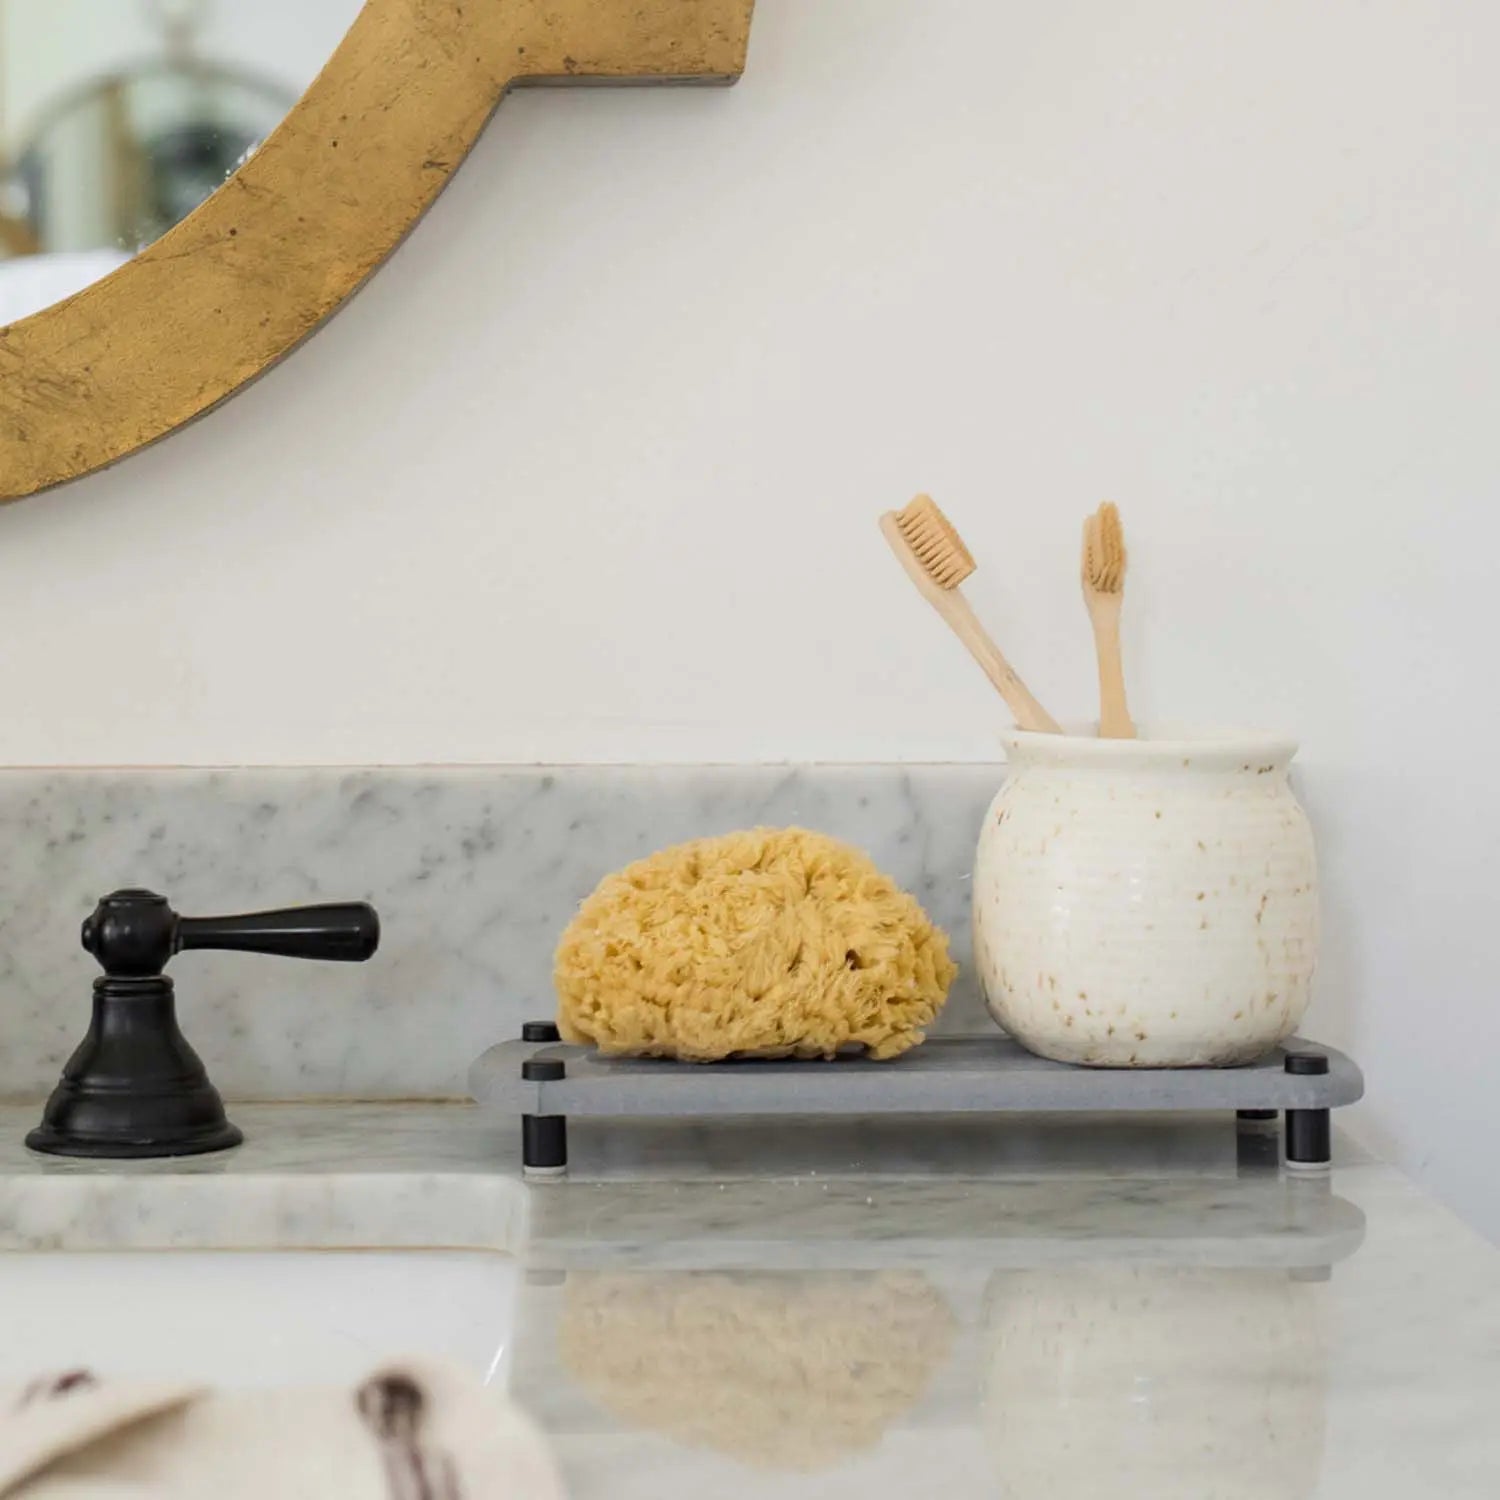 slate sink caddy in context with sponge and toothbrush holder